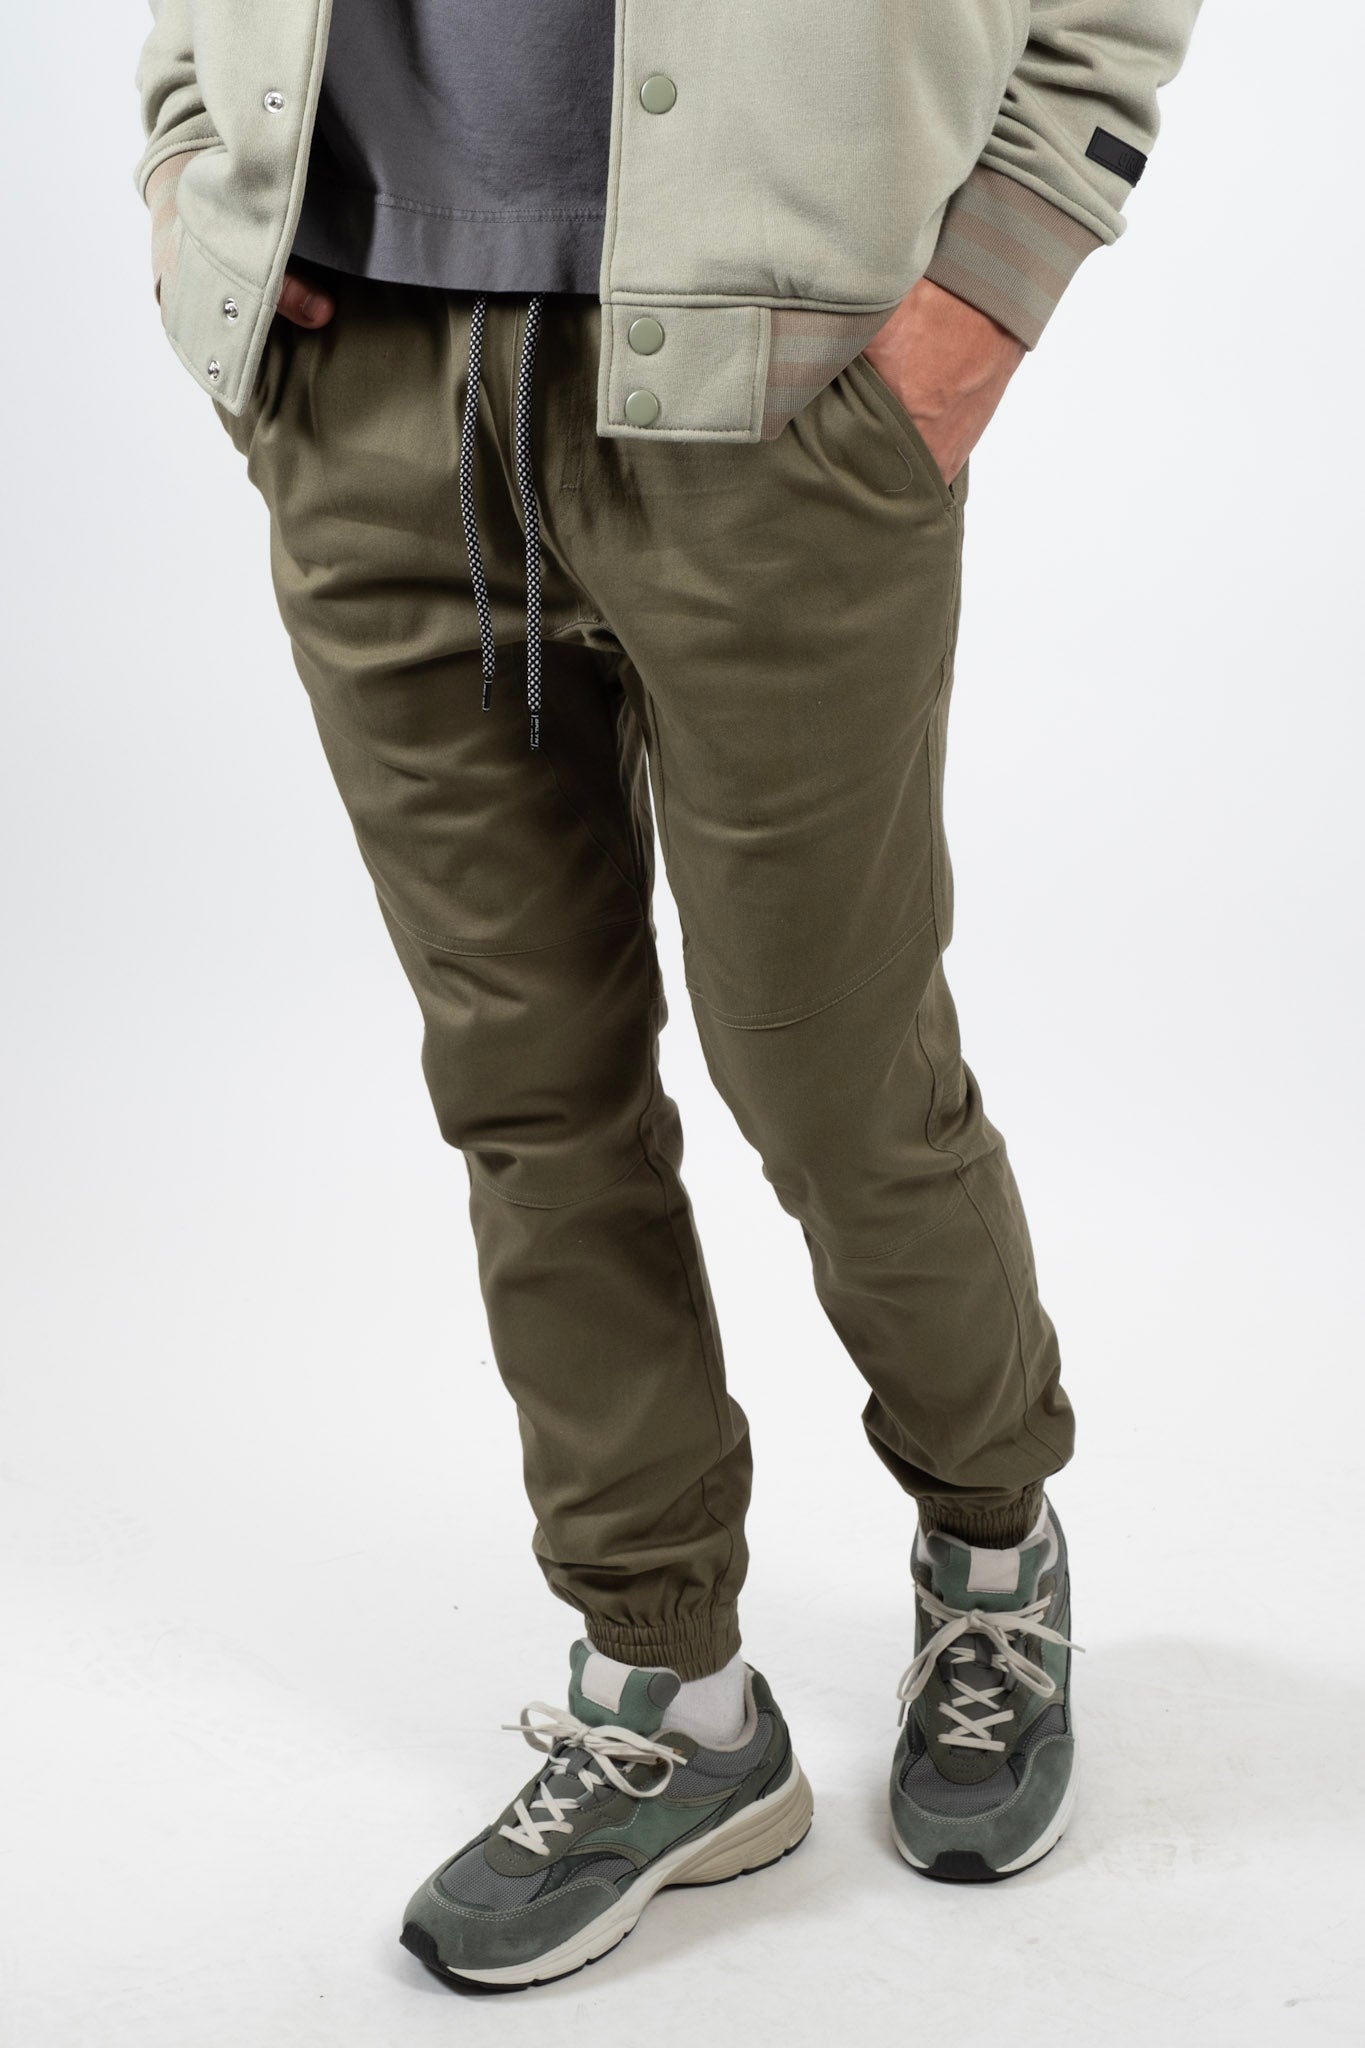 BLACK TWILL JOGGER PANT WITH ZIPPER POCKET – Bloomefield